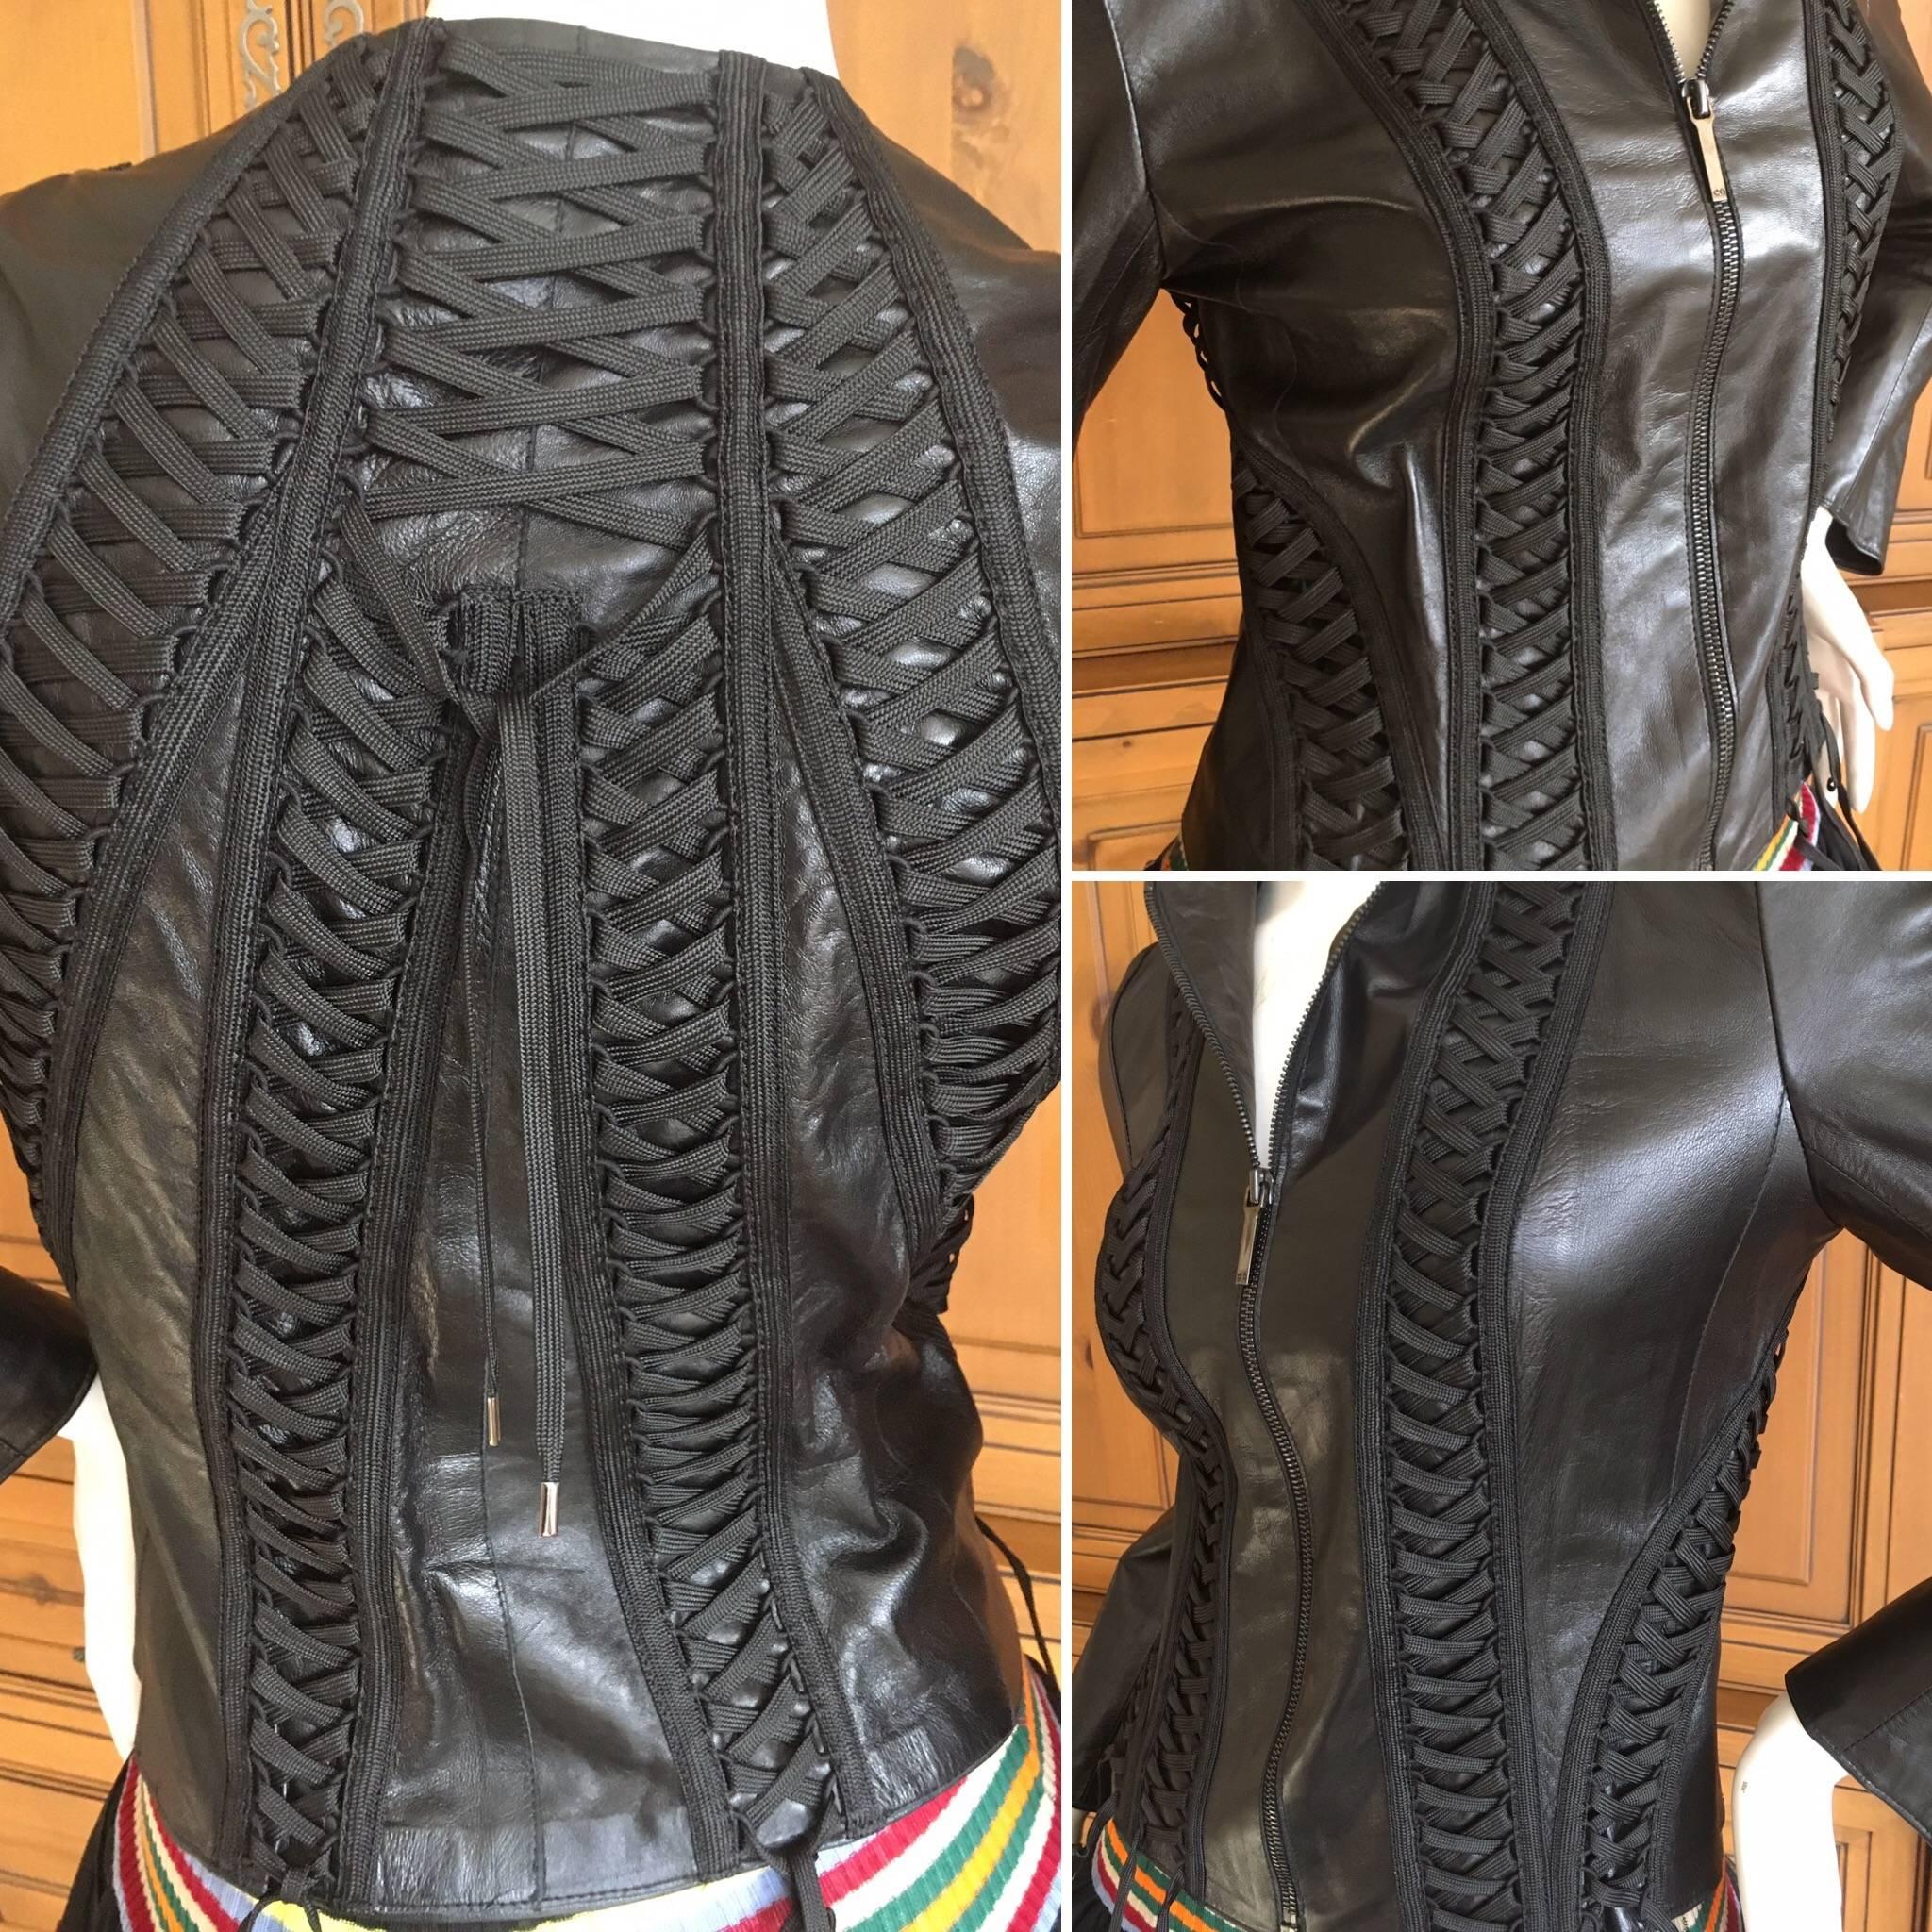 Christian Dior Black Lambskin Leather Corset Laced Bondage Jacket by John Galliano.
Size 36
Bust 36"
Waist 28"
Length 20"
Sleeve 26"
Excellent condition